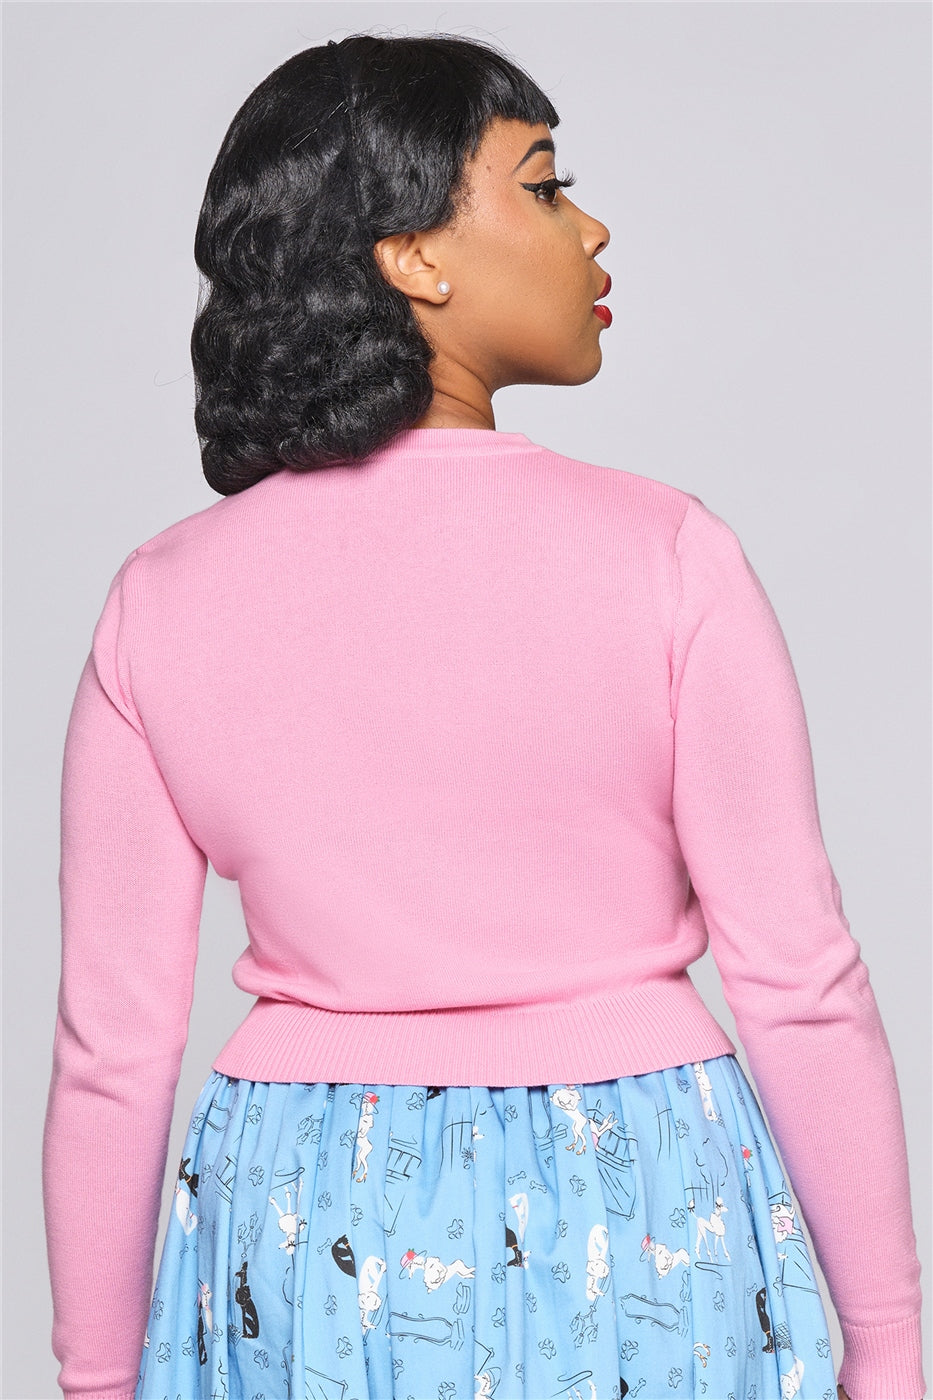 Tall model with short black hair standing facing away from the camera showing the plain pink back of the Char Poodle Cardigan